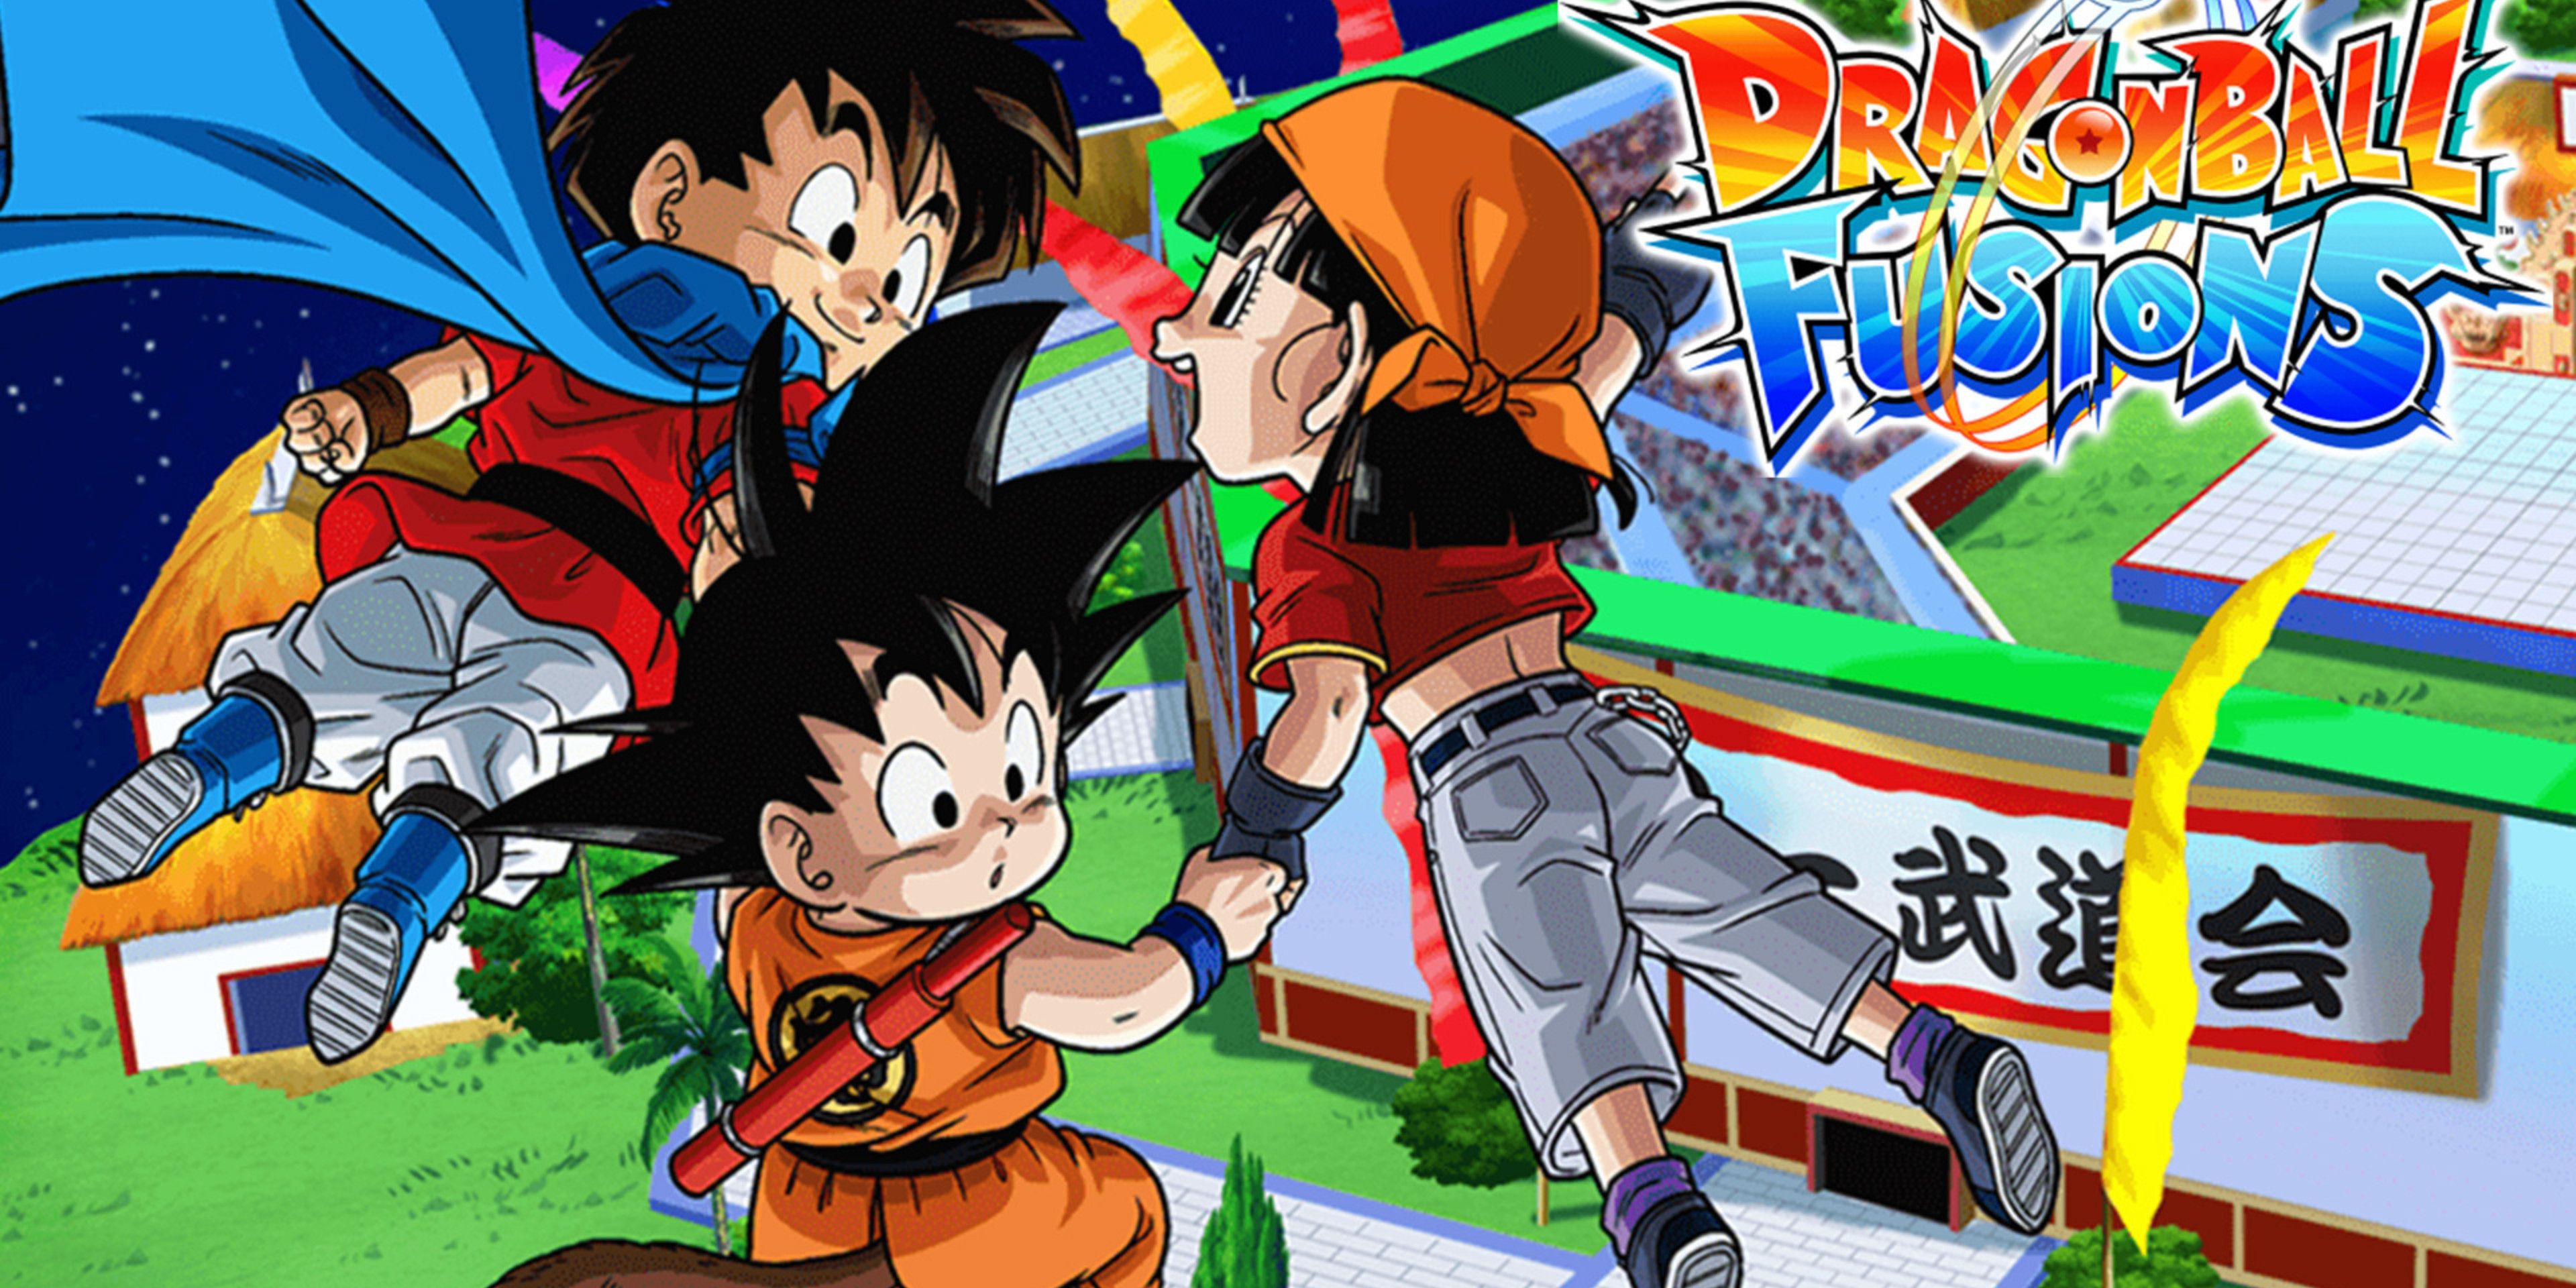 Pan holding Kid Goku's hand along with Tekka as they fly above the martial arts stadium